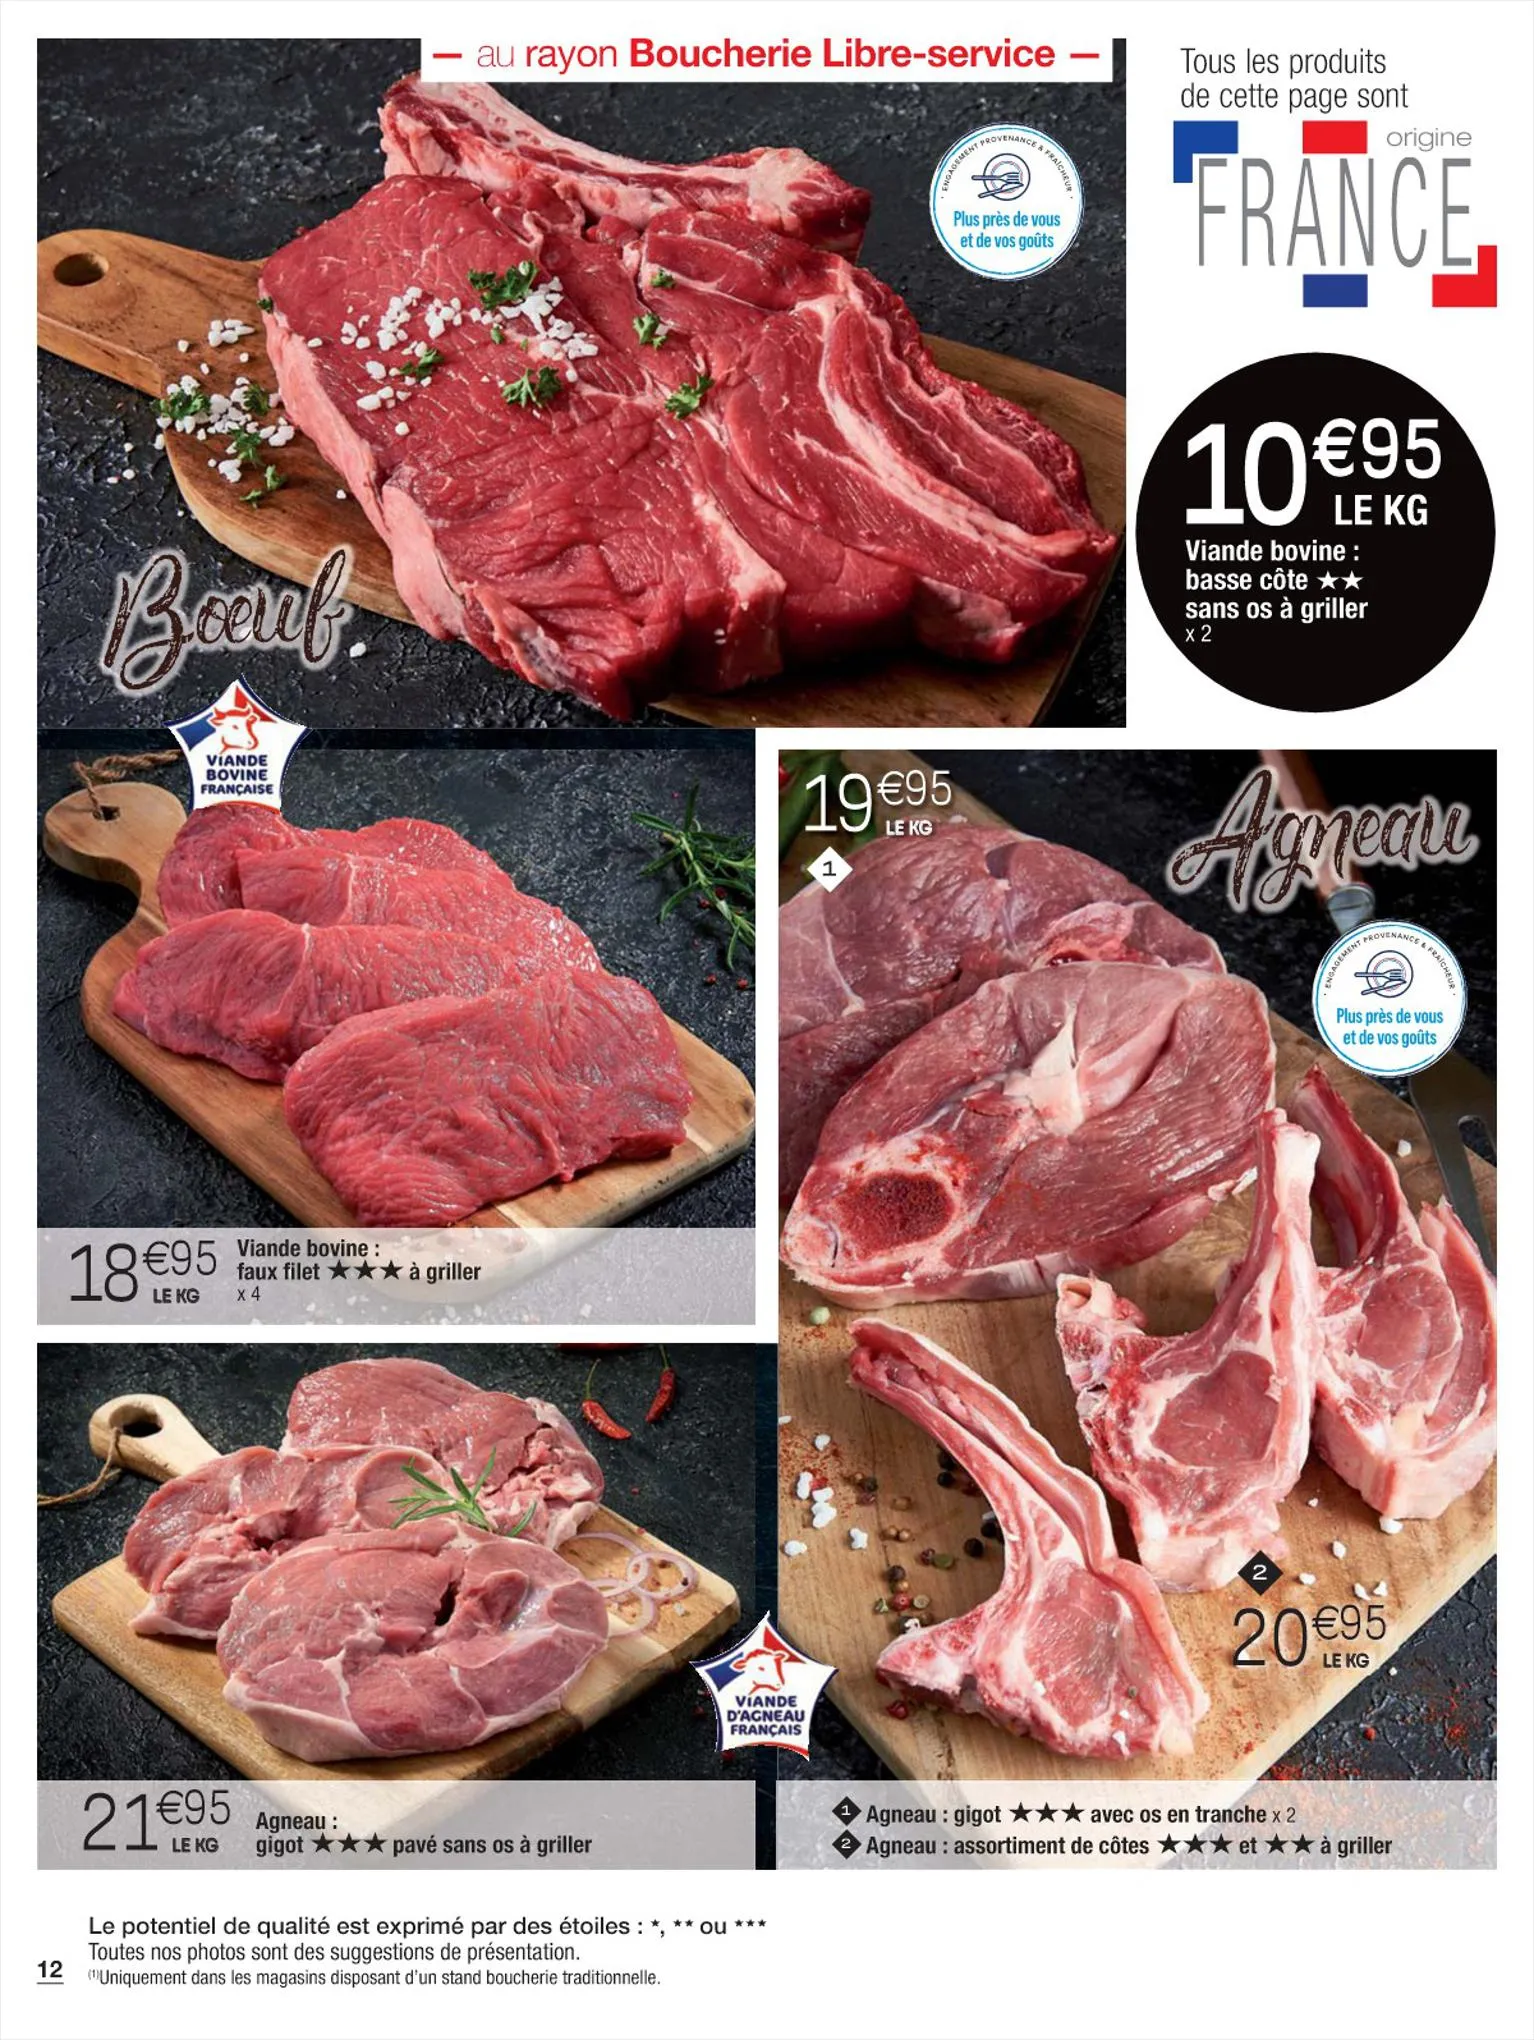 Catalogue Spécial Barbecue, page 00012